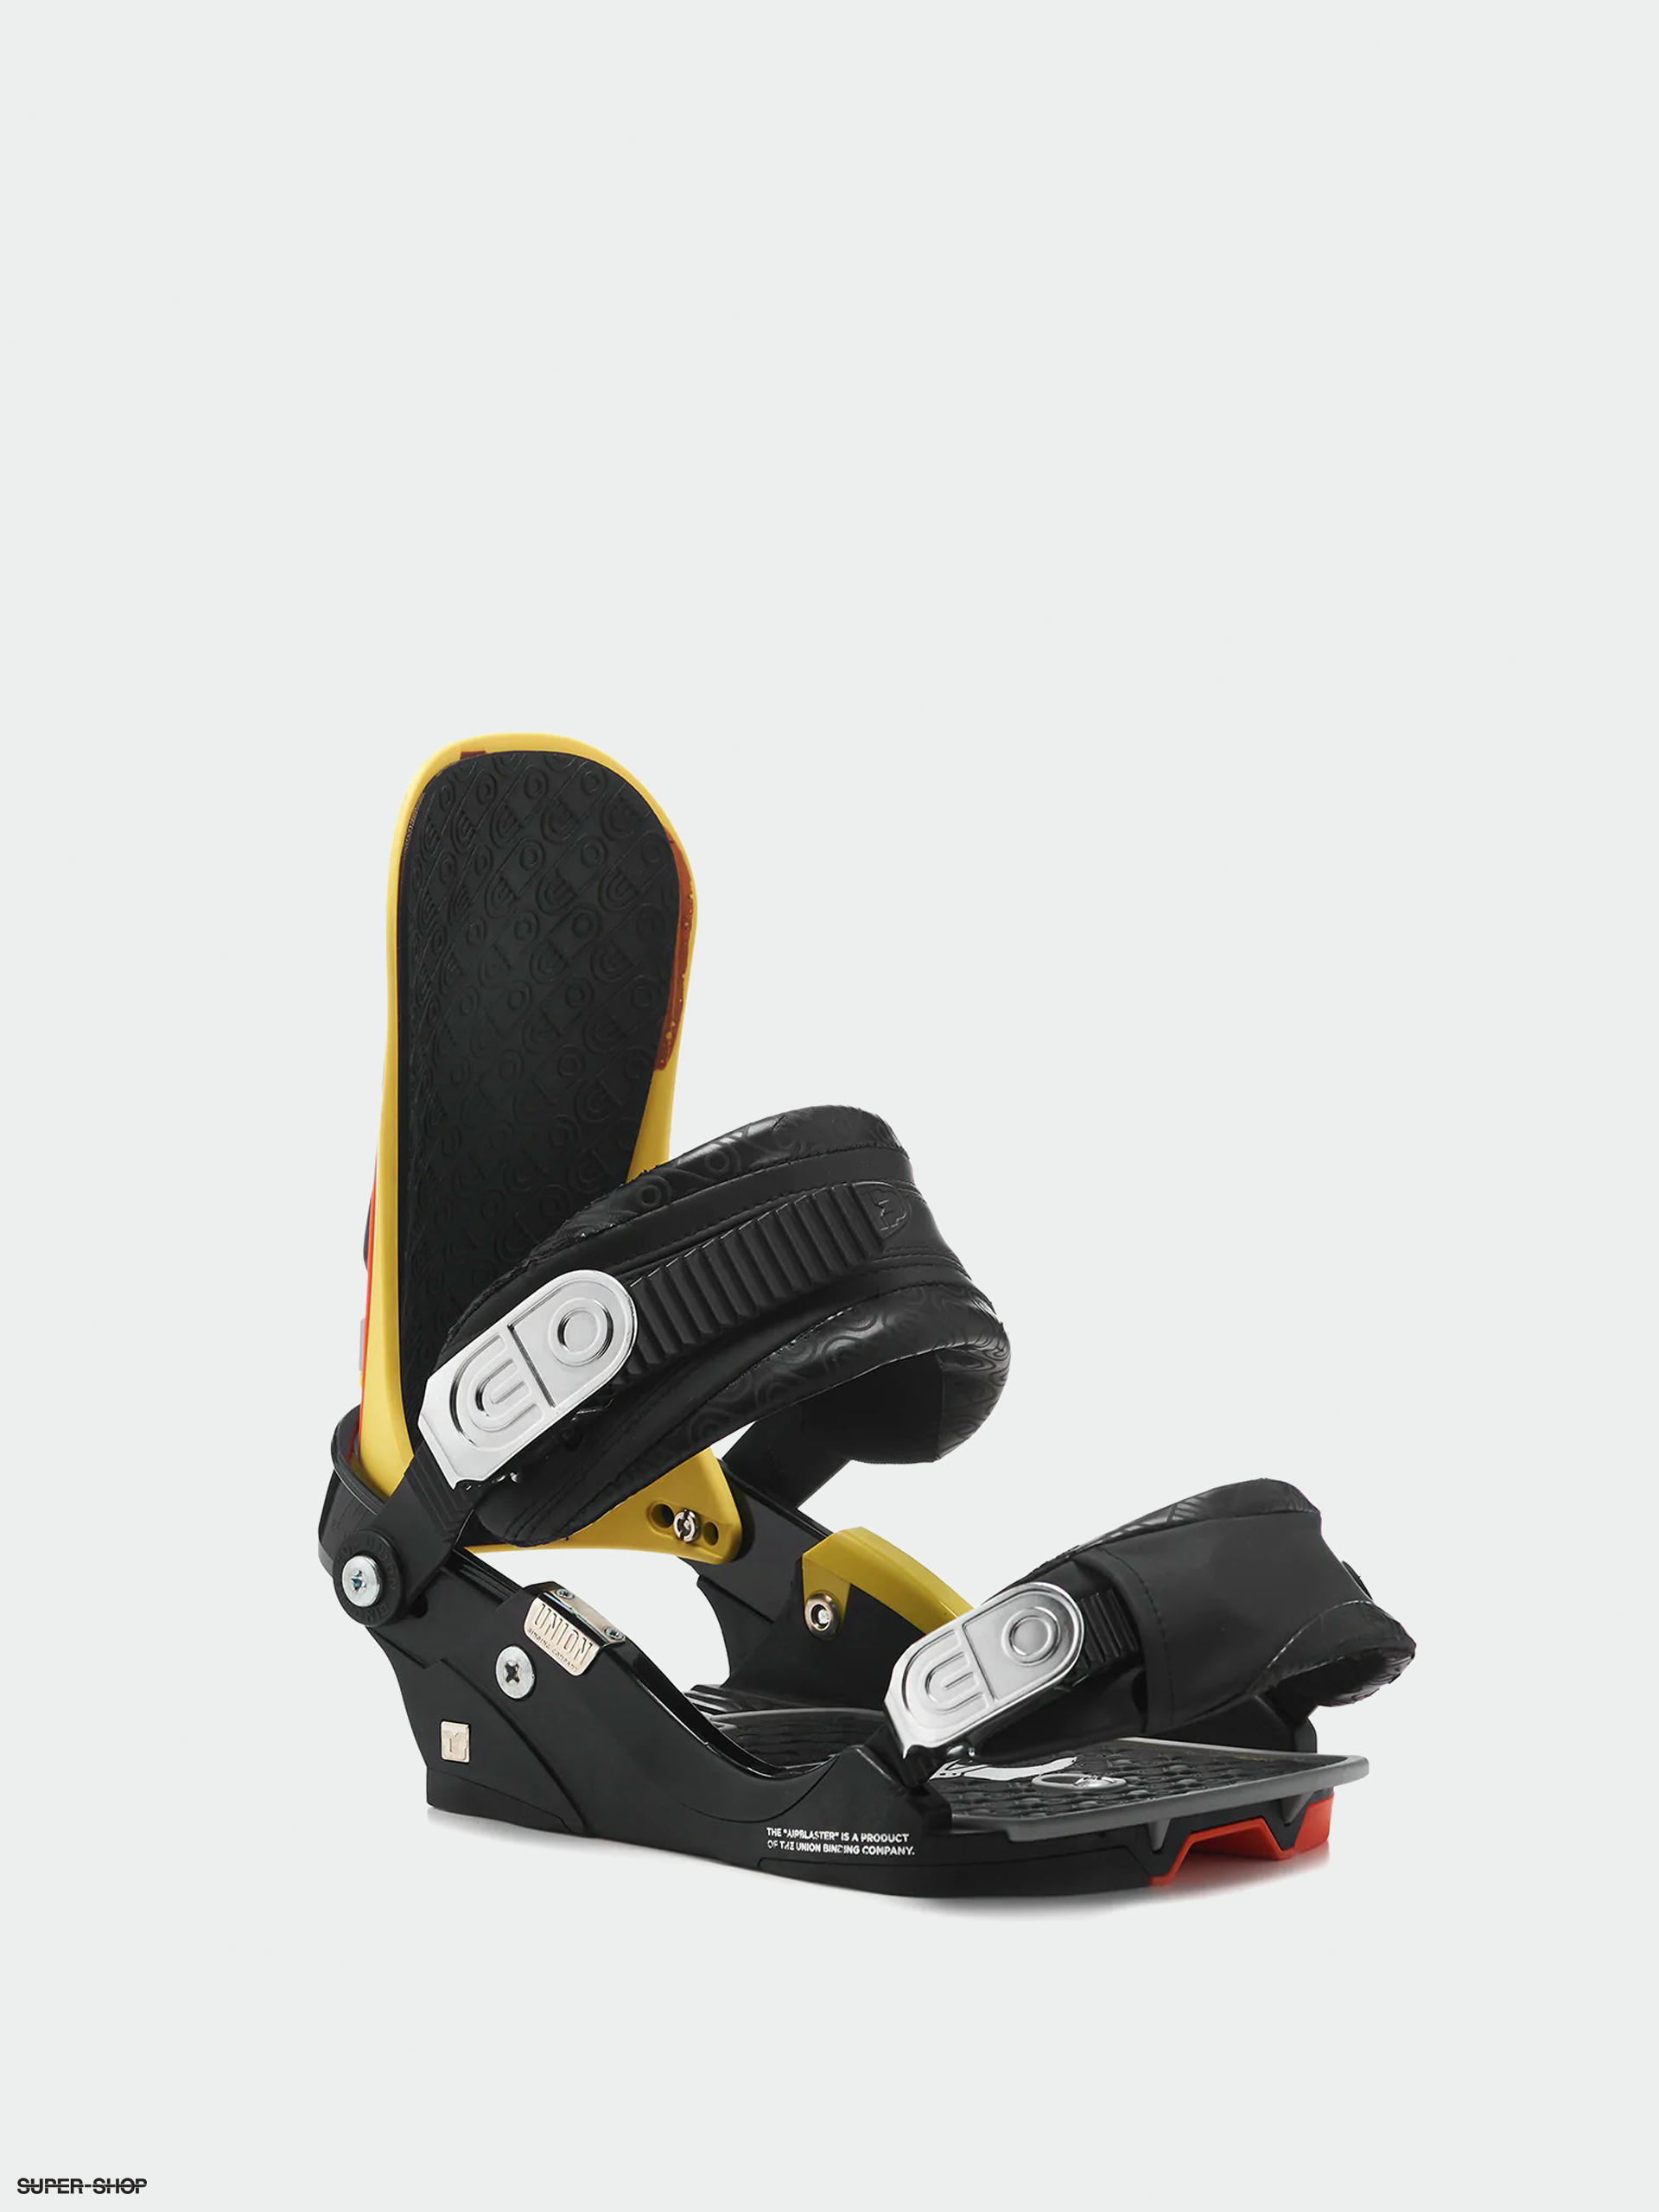 Mens Union Force x Airblaster Snowboard bindings (multicolor)